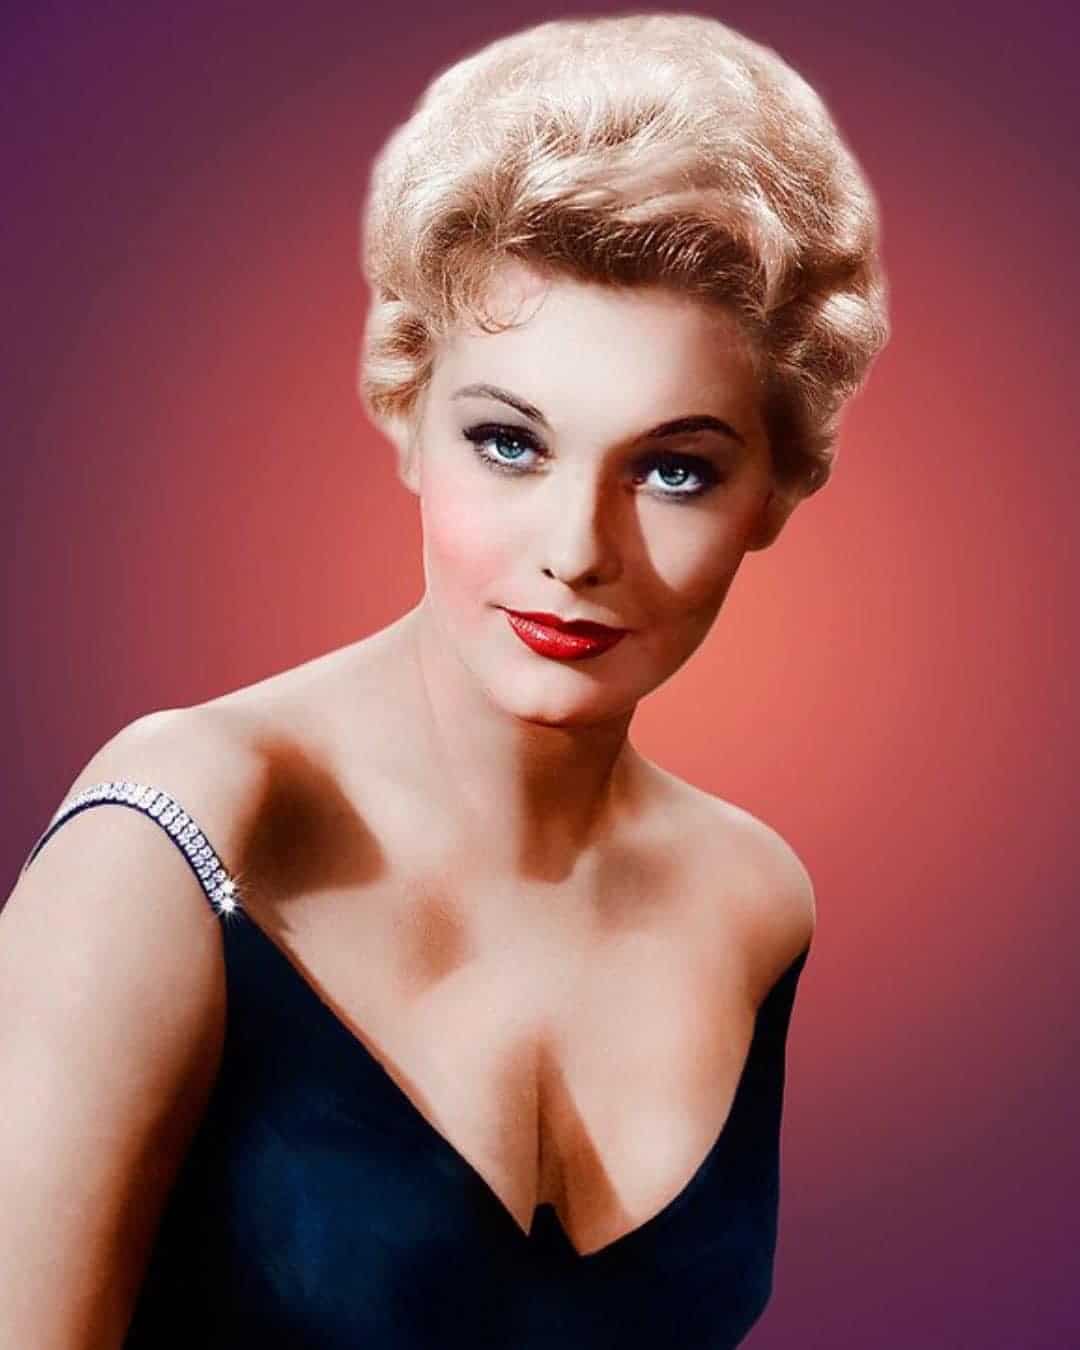 She had one of the most beautiful faces in 50s Hollywood. Kim Novak is 91 years old, this is what she looks like today